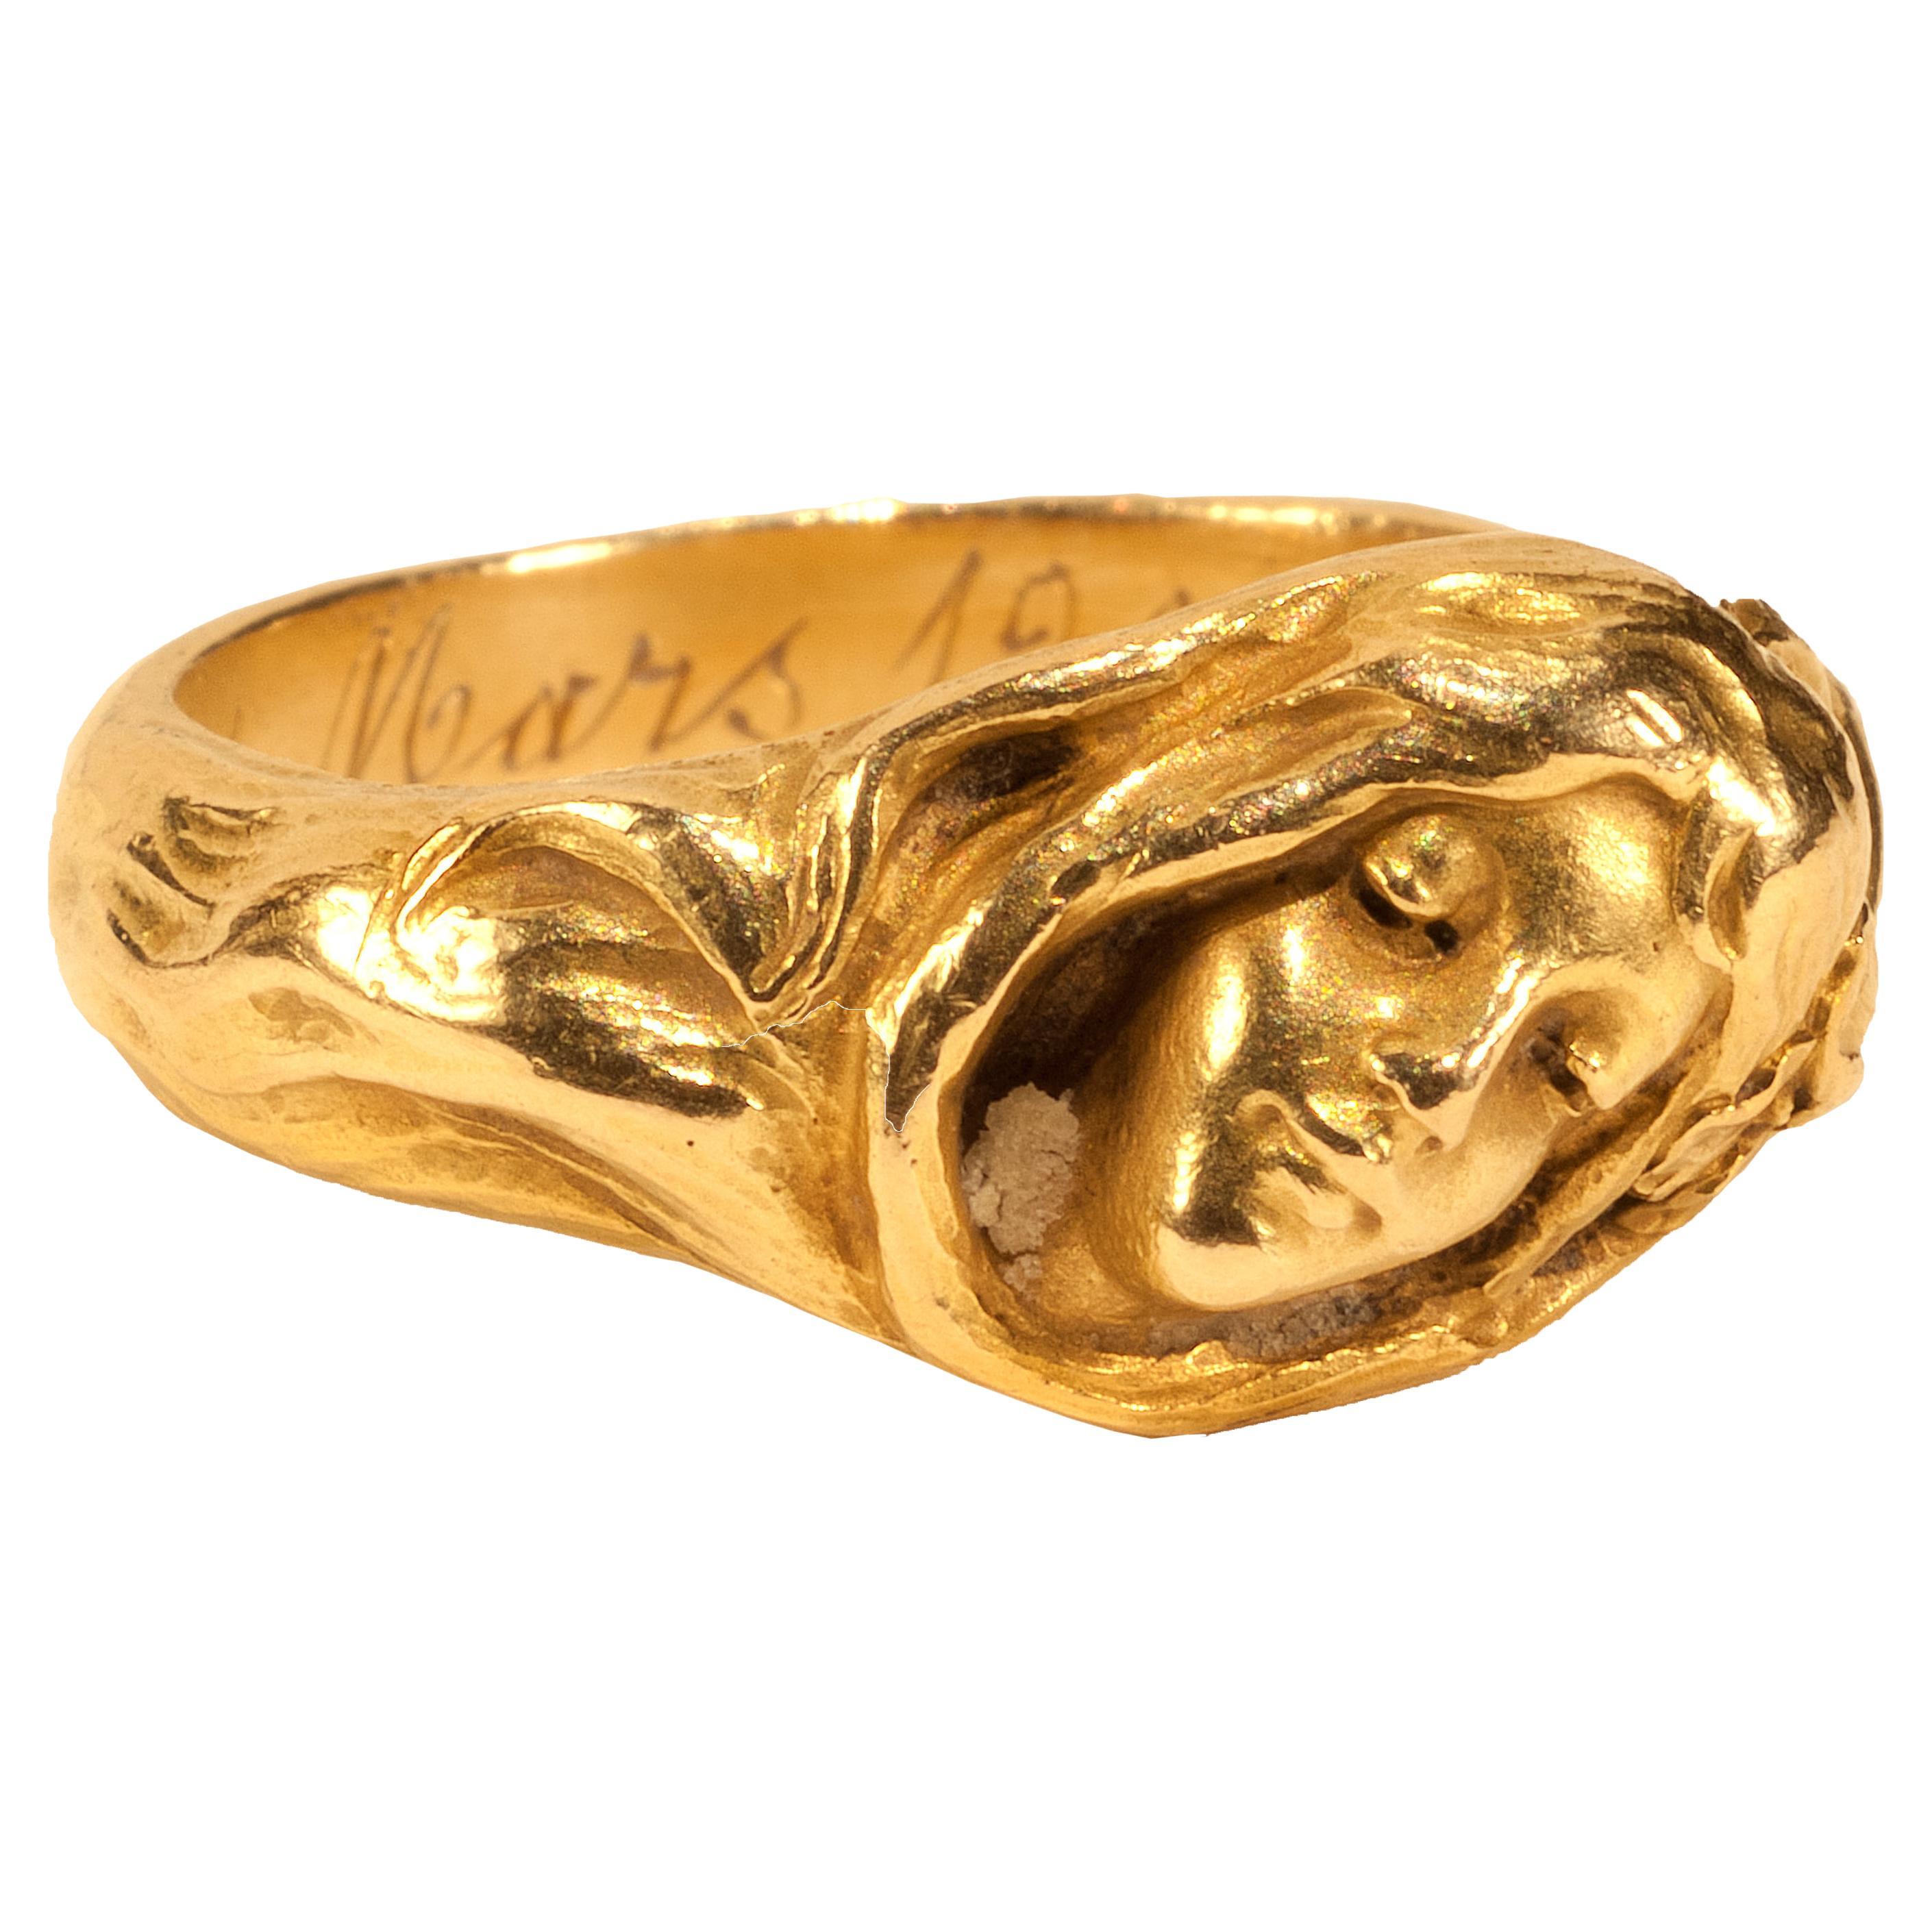 ART NOUVEAU OPHELIA RING 
France, 1909 
Gold 
Weight 11.5 gr., US size 7.25, UK size O ½ 

This sculptural ring is made of cast and finely chased gold. The hoop widens and merges into the bezel. The shoulders are subtly molded with entwined twigs